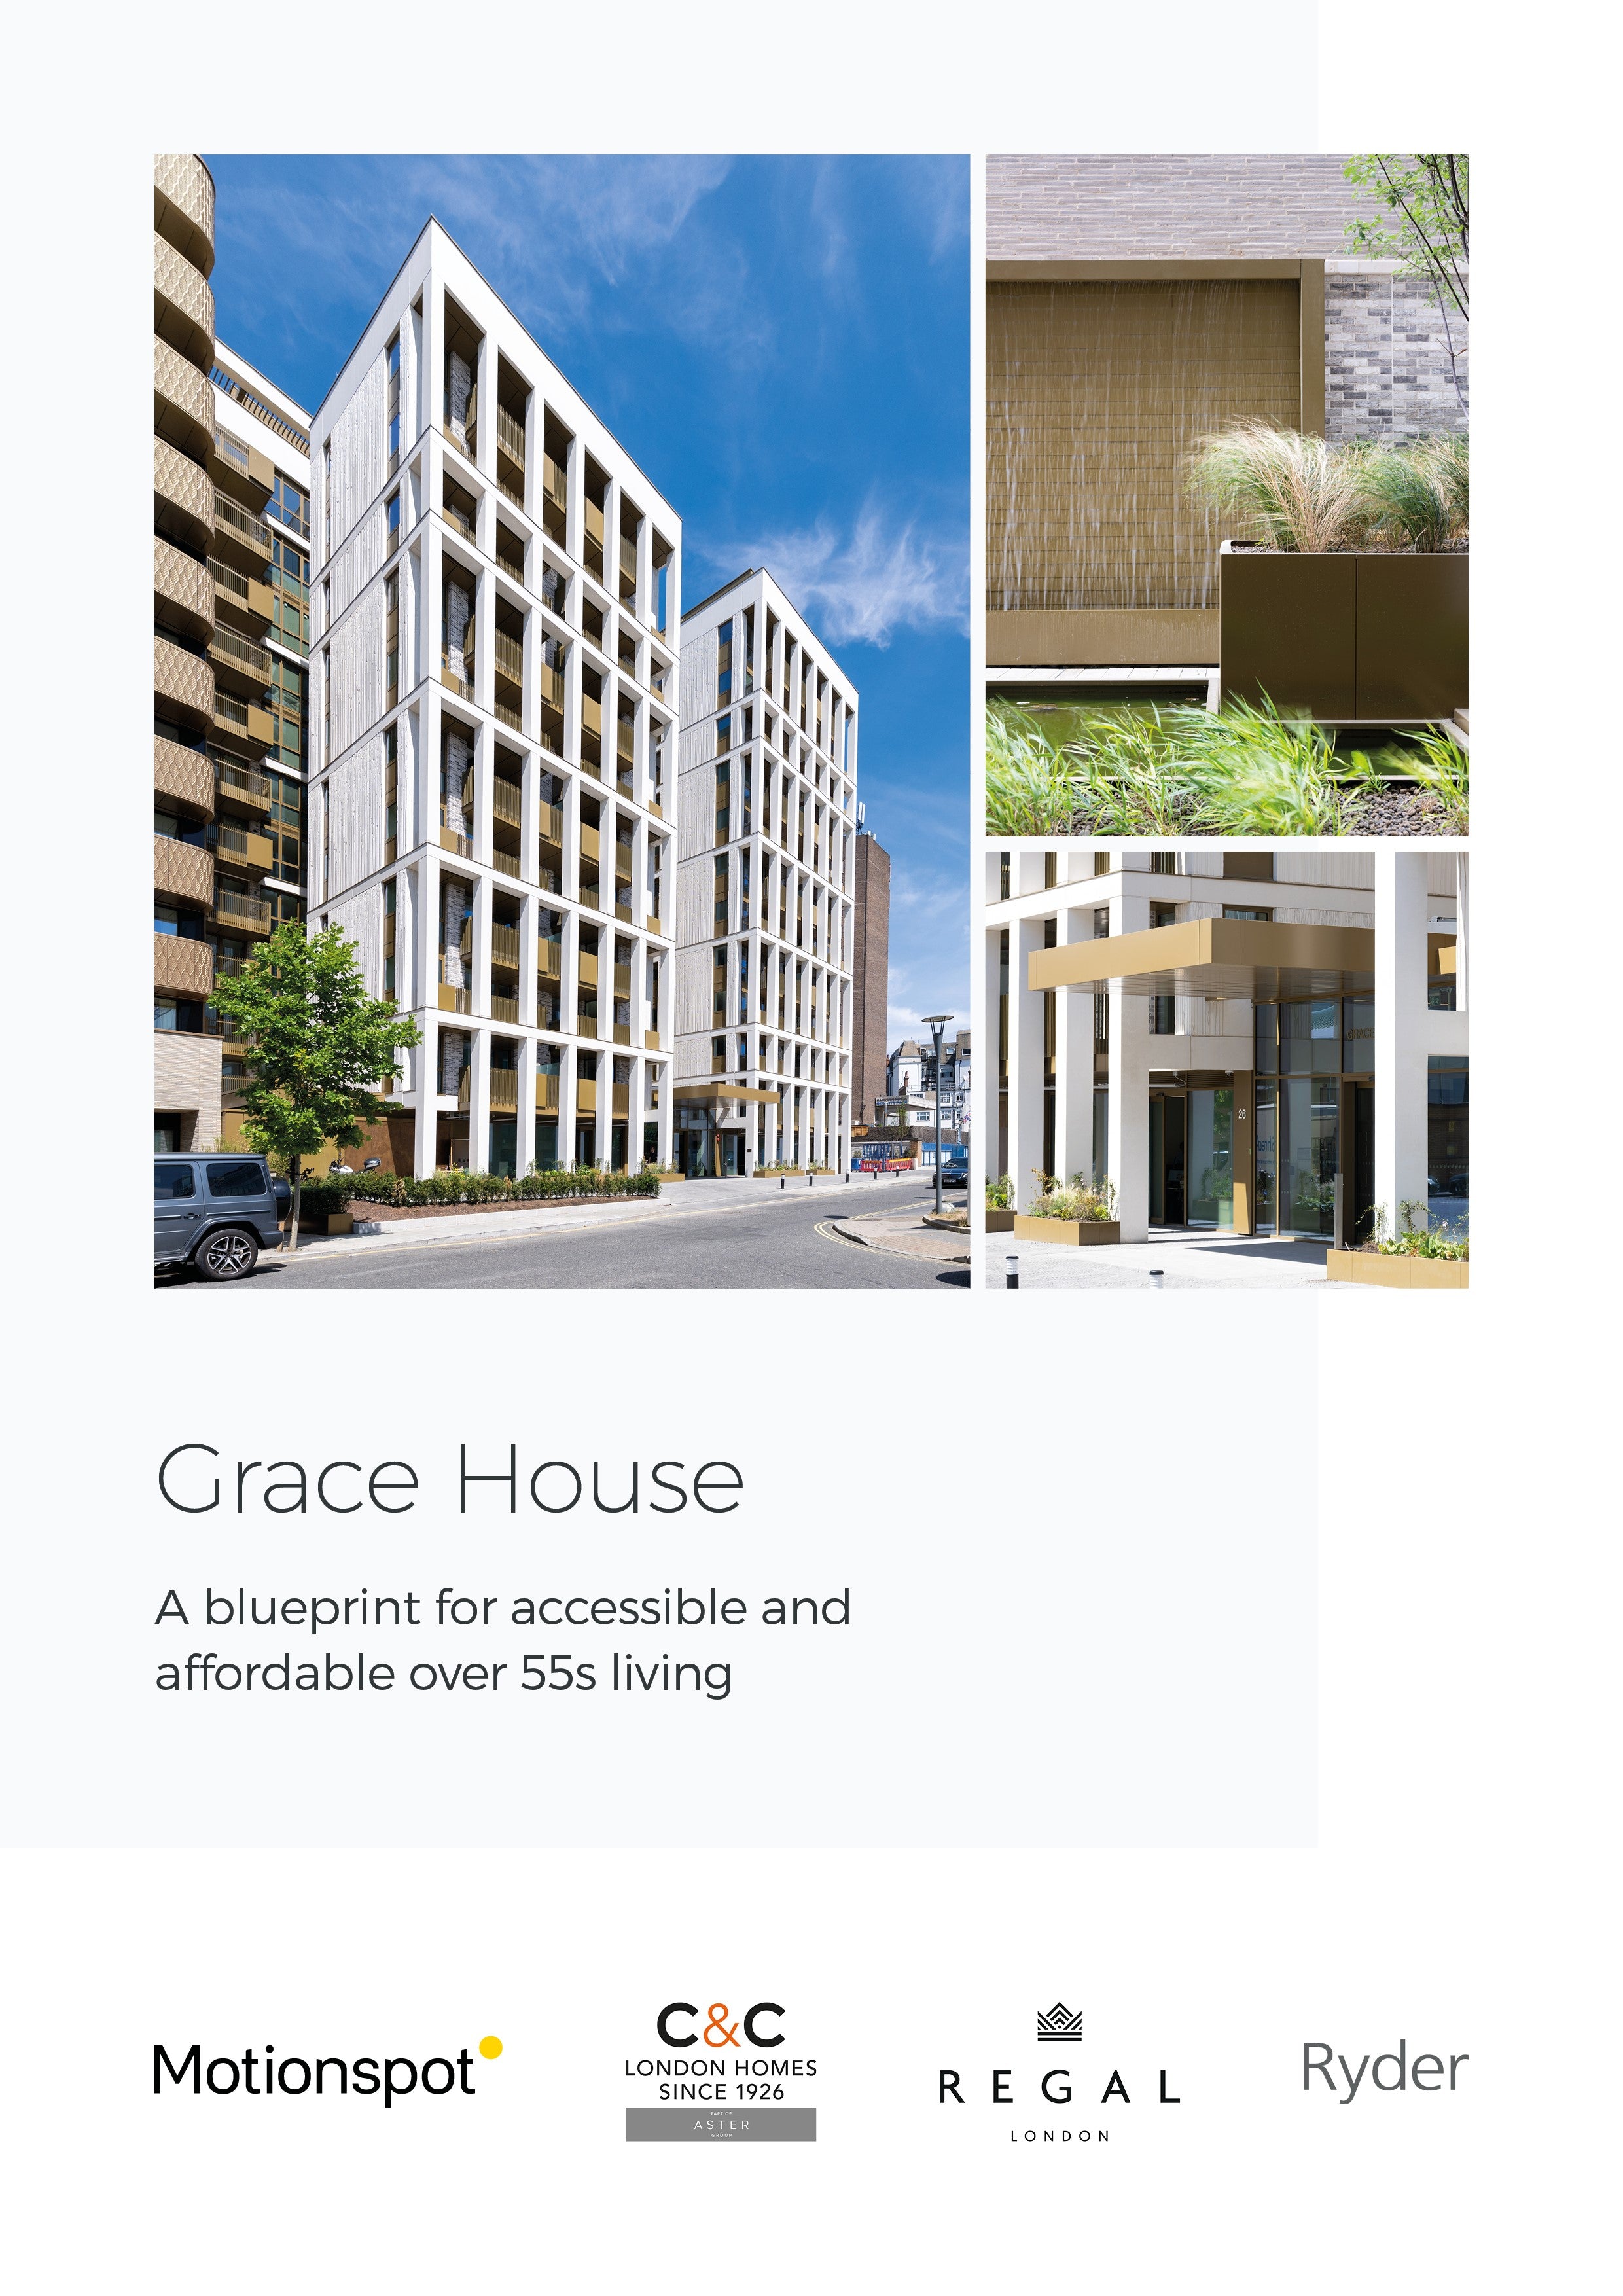 Grace House: Accessible Over 55's Living